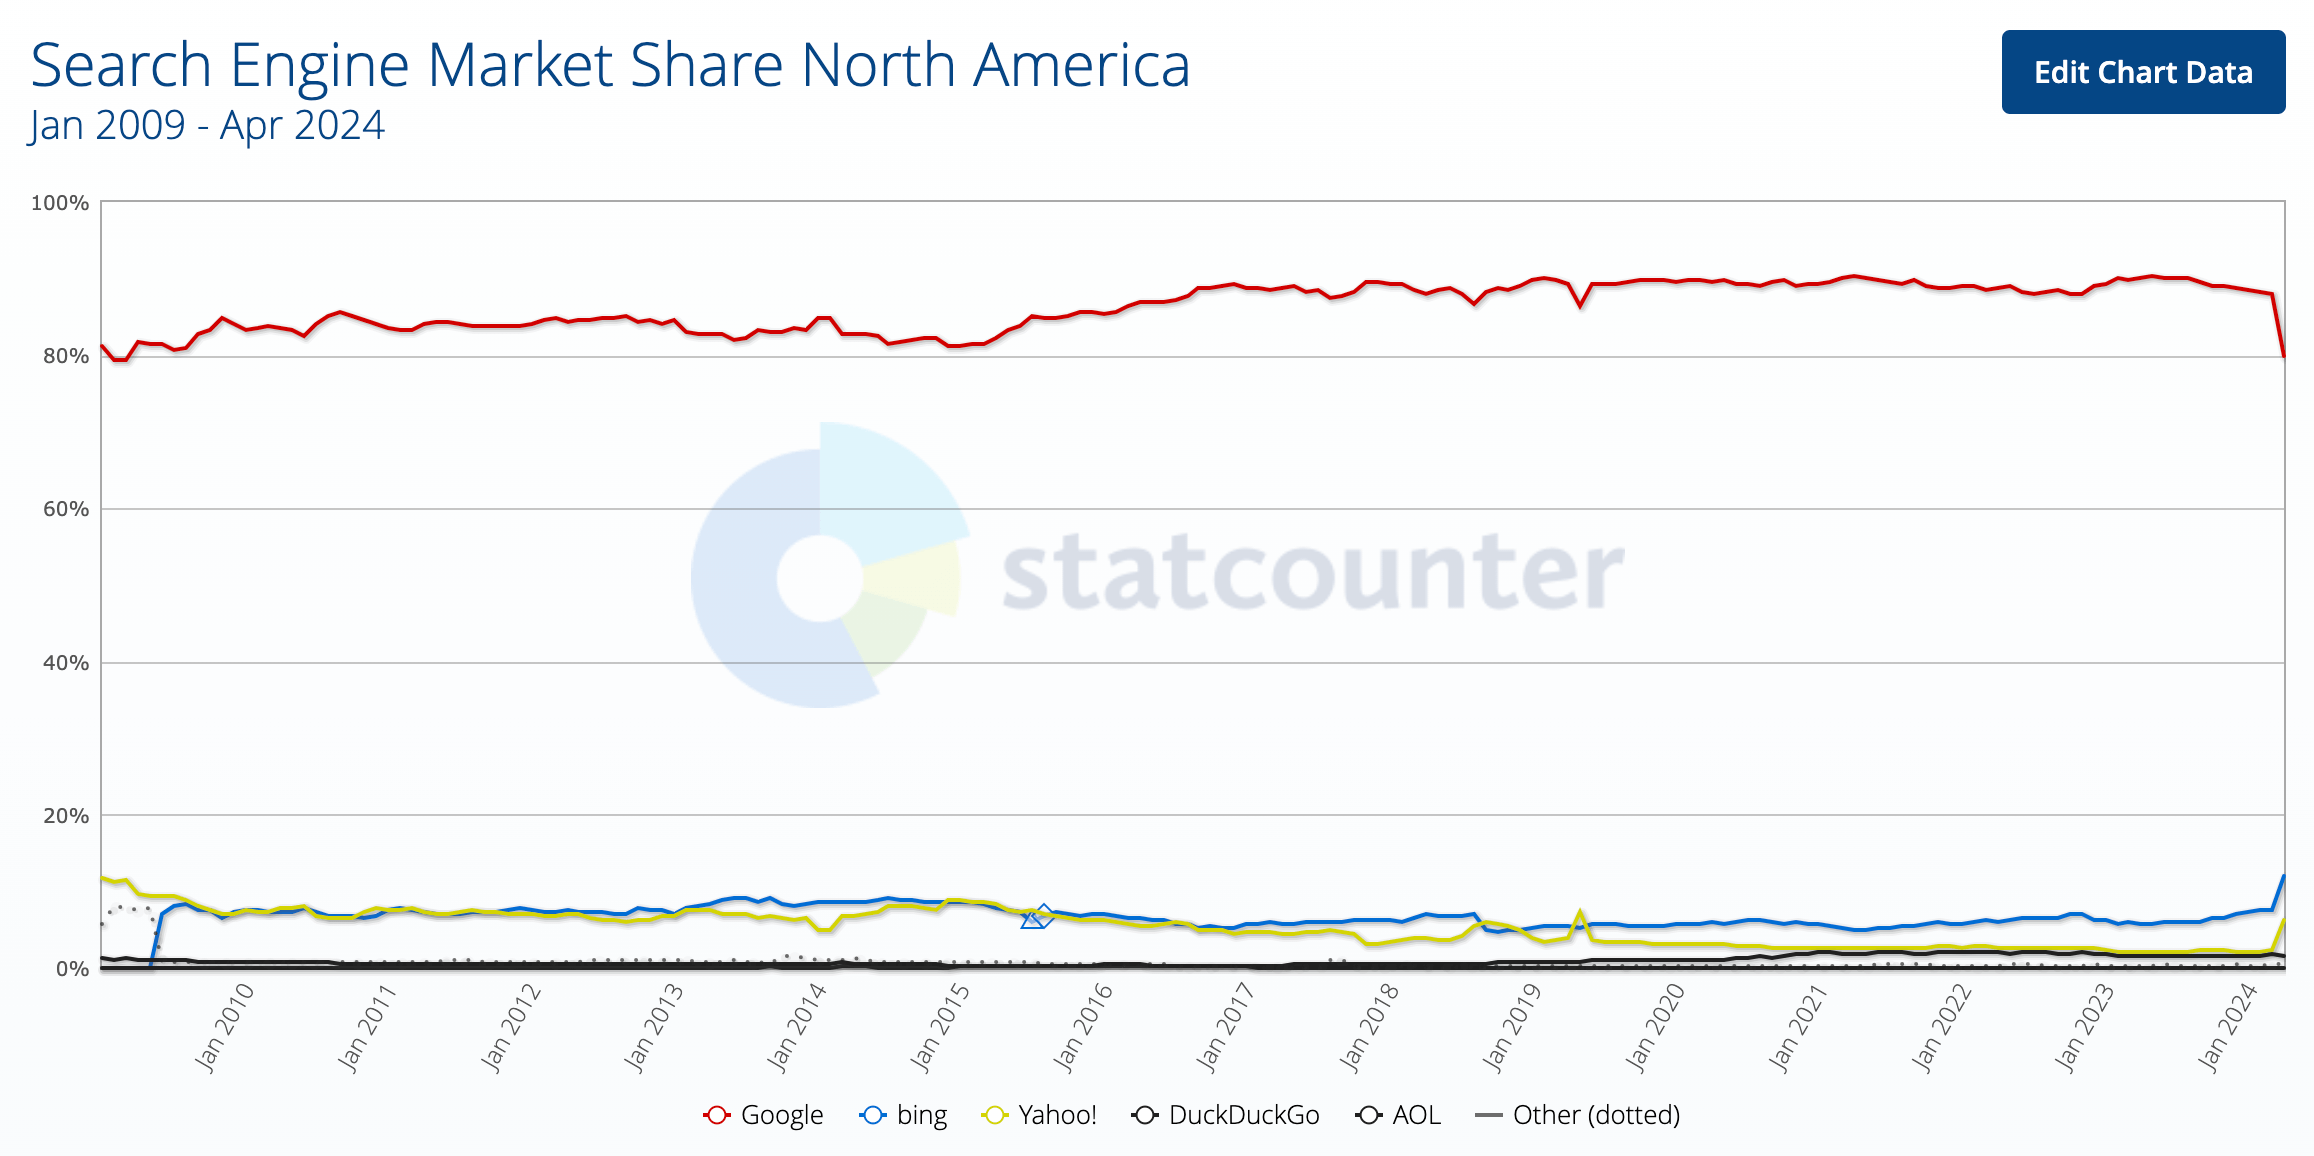 Google US market share drops below 80%, lowest since 2009 as Bing AI usage spikes